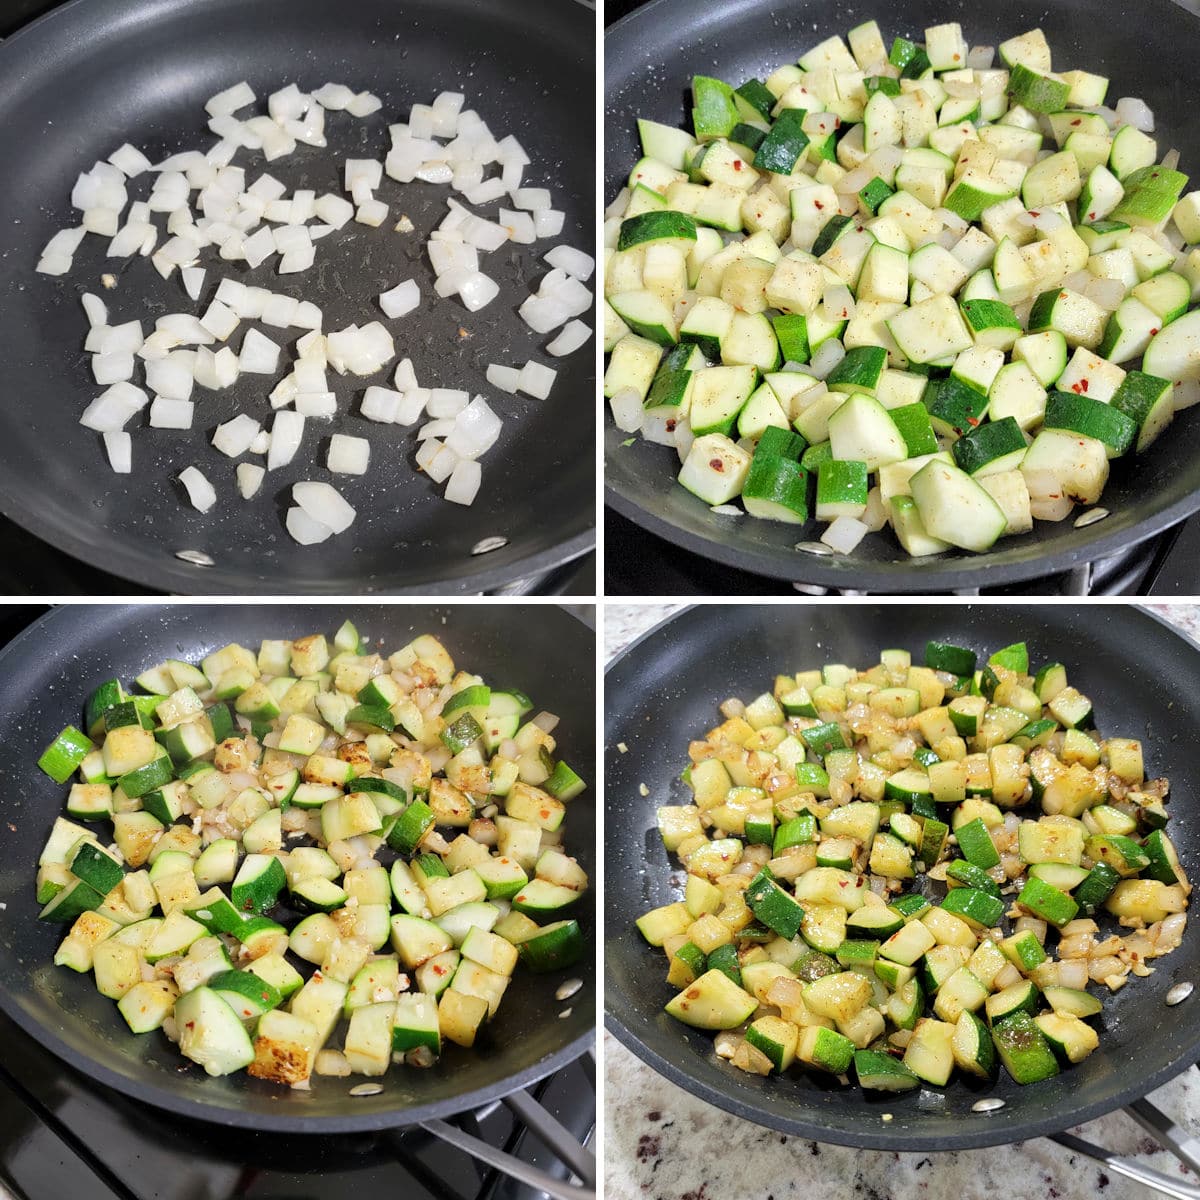 Zucchini and onions cooking in a skillet on the stovetop.